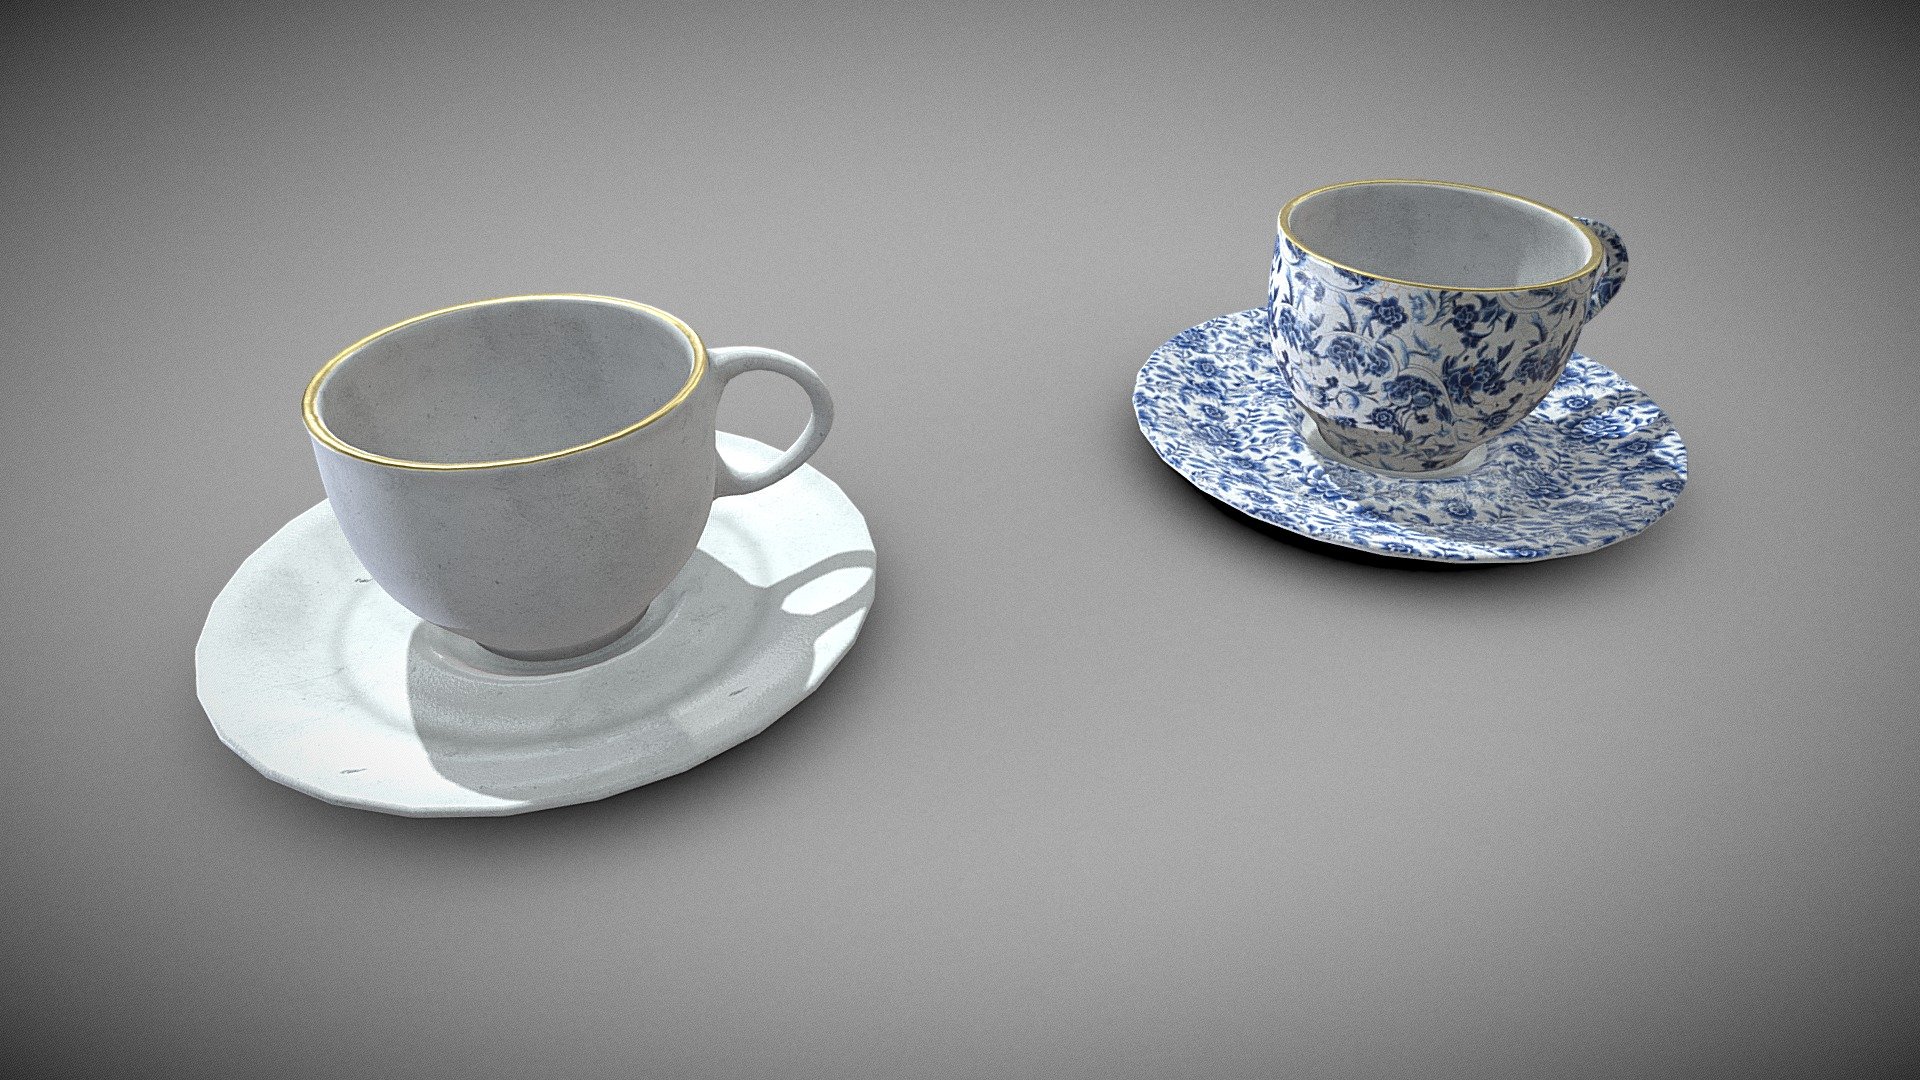 A simple pair of dusty cup and saucers, one is plain porcelain and the other has a flowery pattern wth a gold rim

PBR textures @4k - Cup and saucer - Buy Royalty Free 3D model by Sousinho 3d model